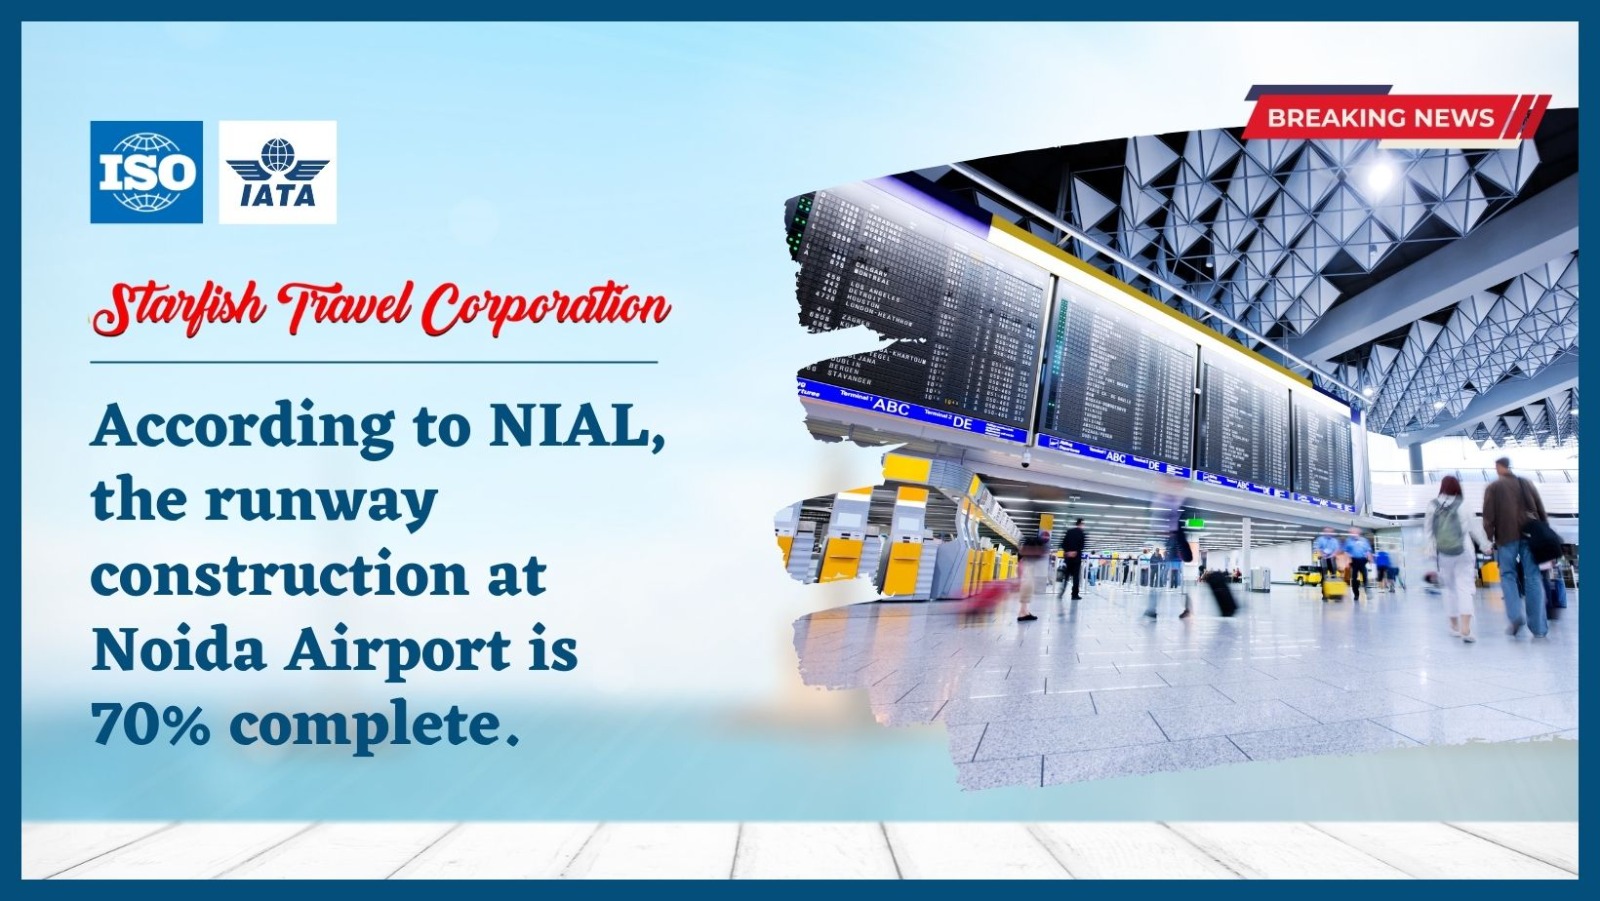 According to NIAL, the runway construction at Noida Airport is 70% complete.